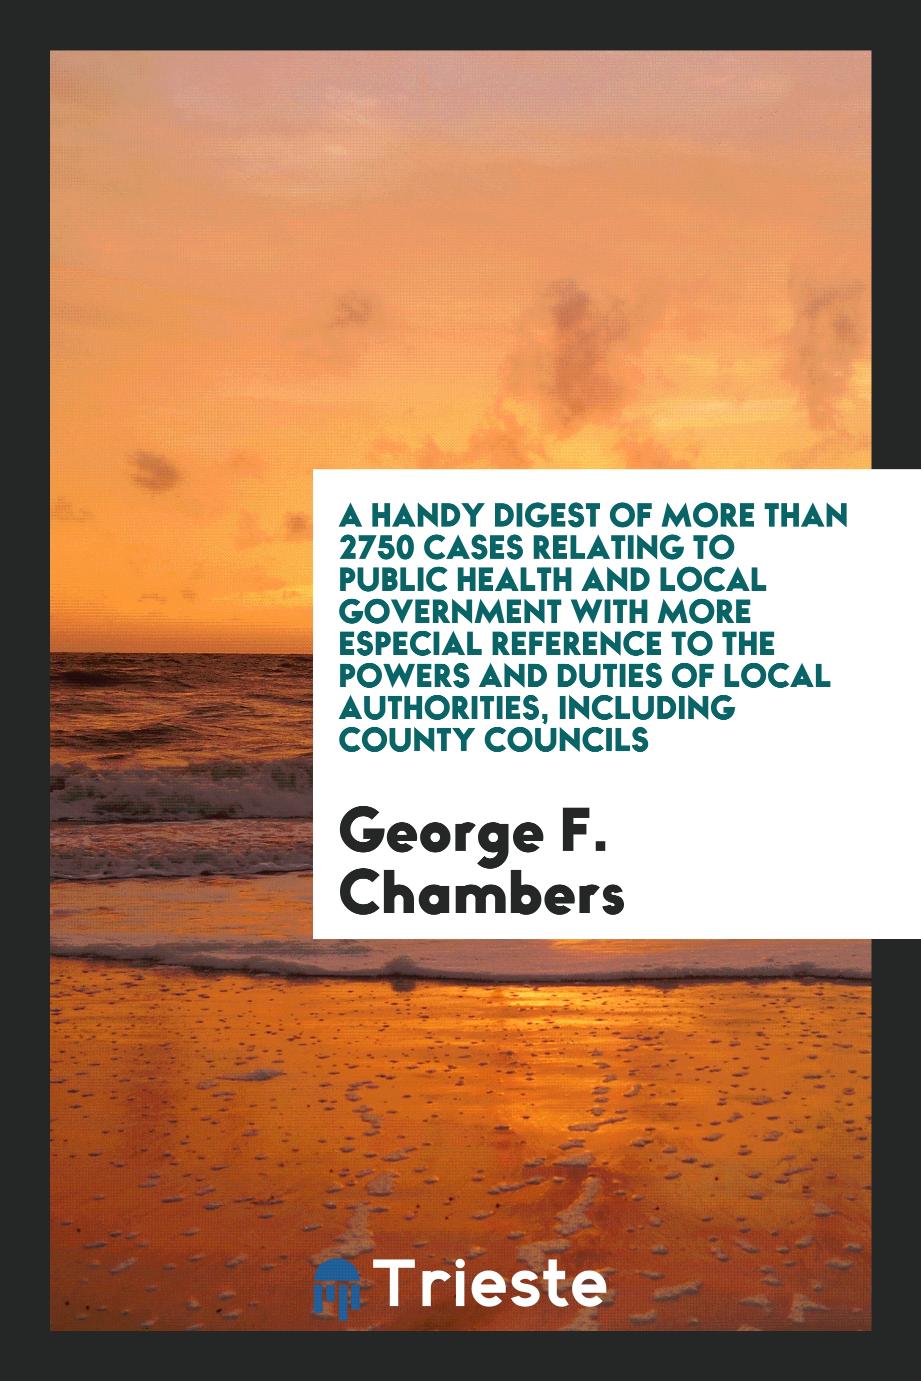 A handy digest of more than 2750 cases relating to public health and local government with more especial reference to the powers and duties of local authorities, including county councils